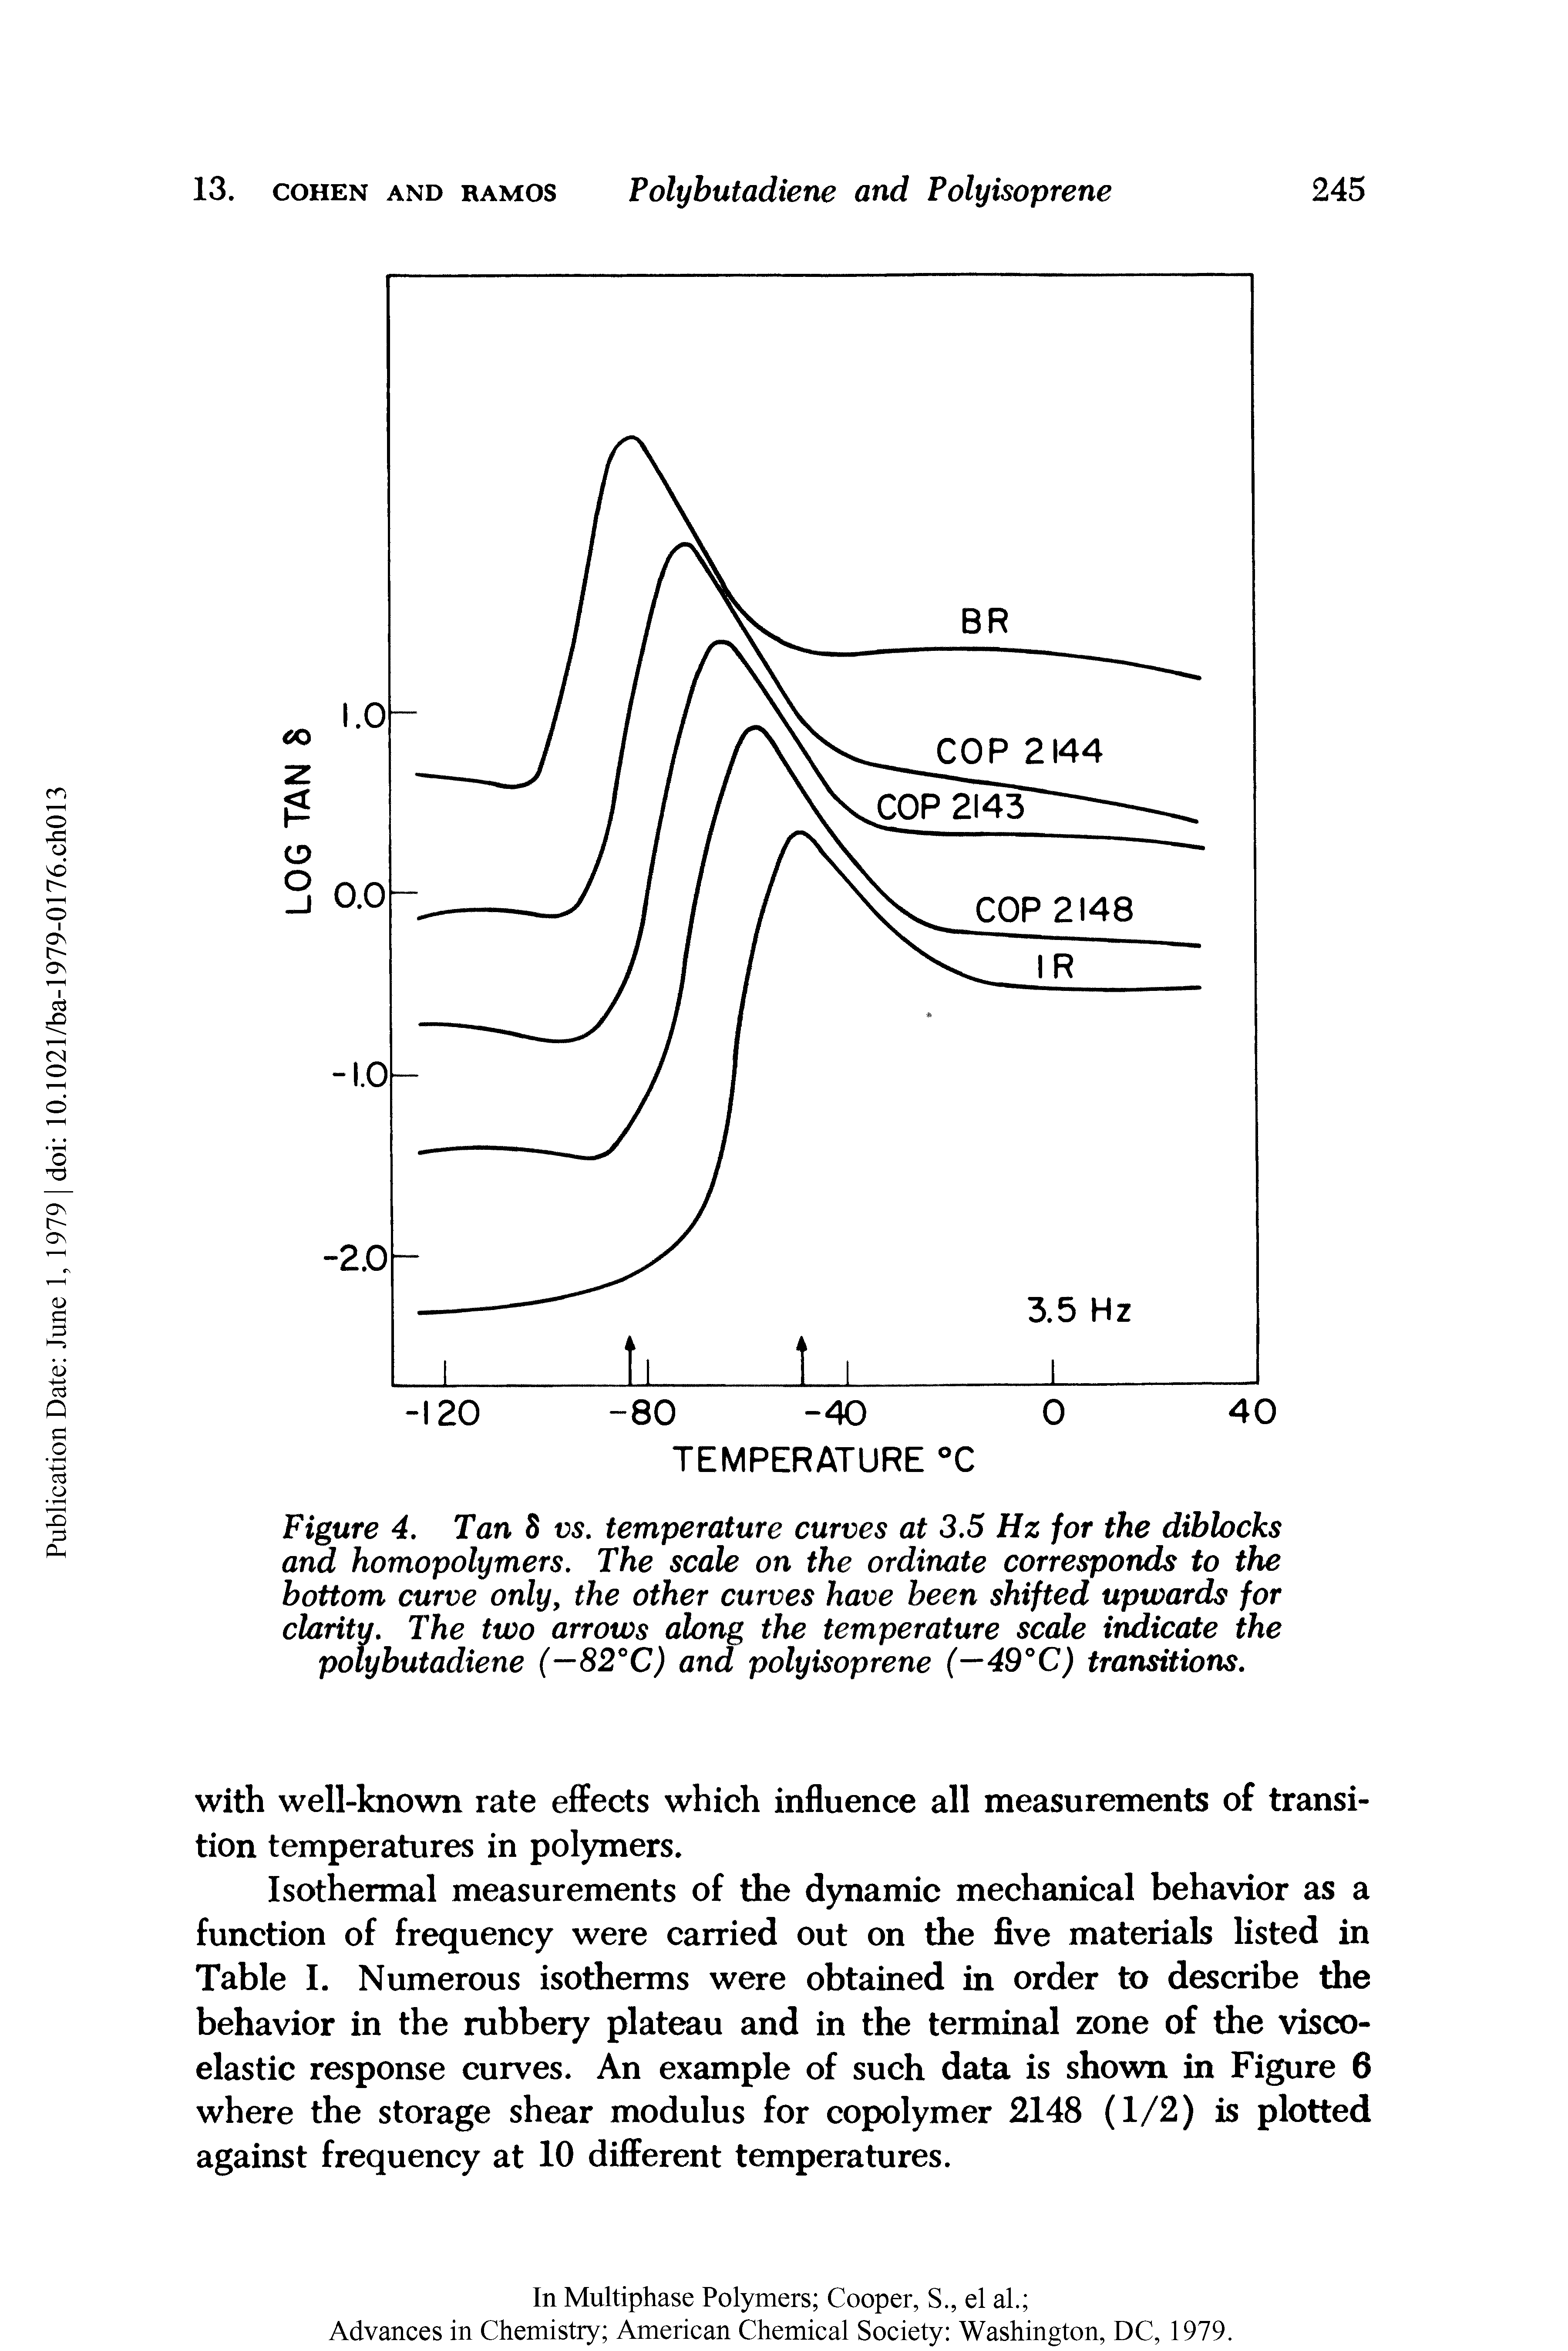 Figure 4. Tan vs. temperature curves at 3.5 Hz for the diblocks and homopolymers. The scale on the ordinate corresponds to the bottom curve only, the other curves have been shifted upwards for clarity. The two arrows along the temperature scale indicate the polybutadiene (—82°C) and polyisoprene (—49°C) transitions.